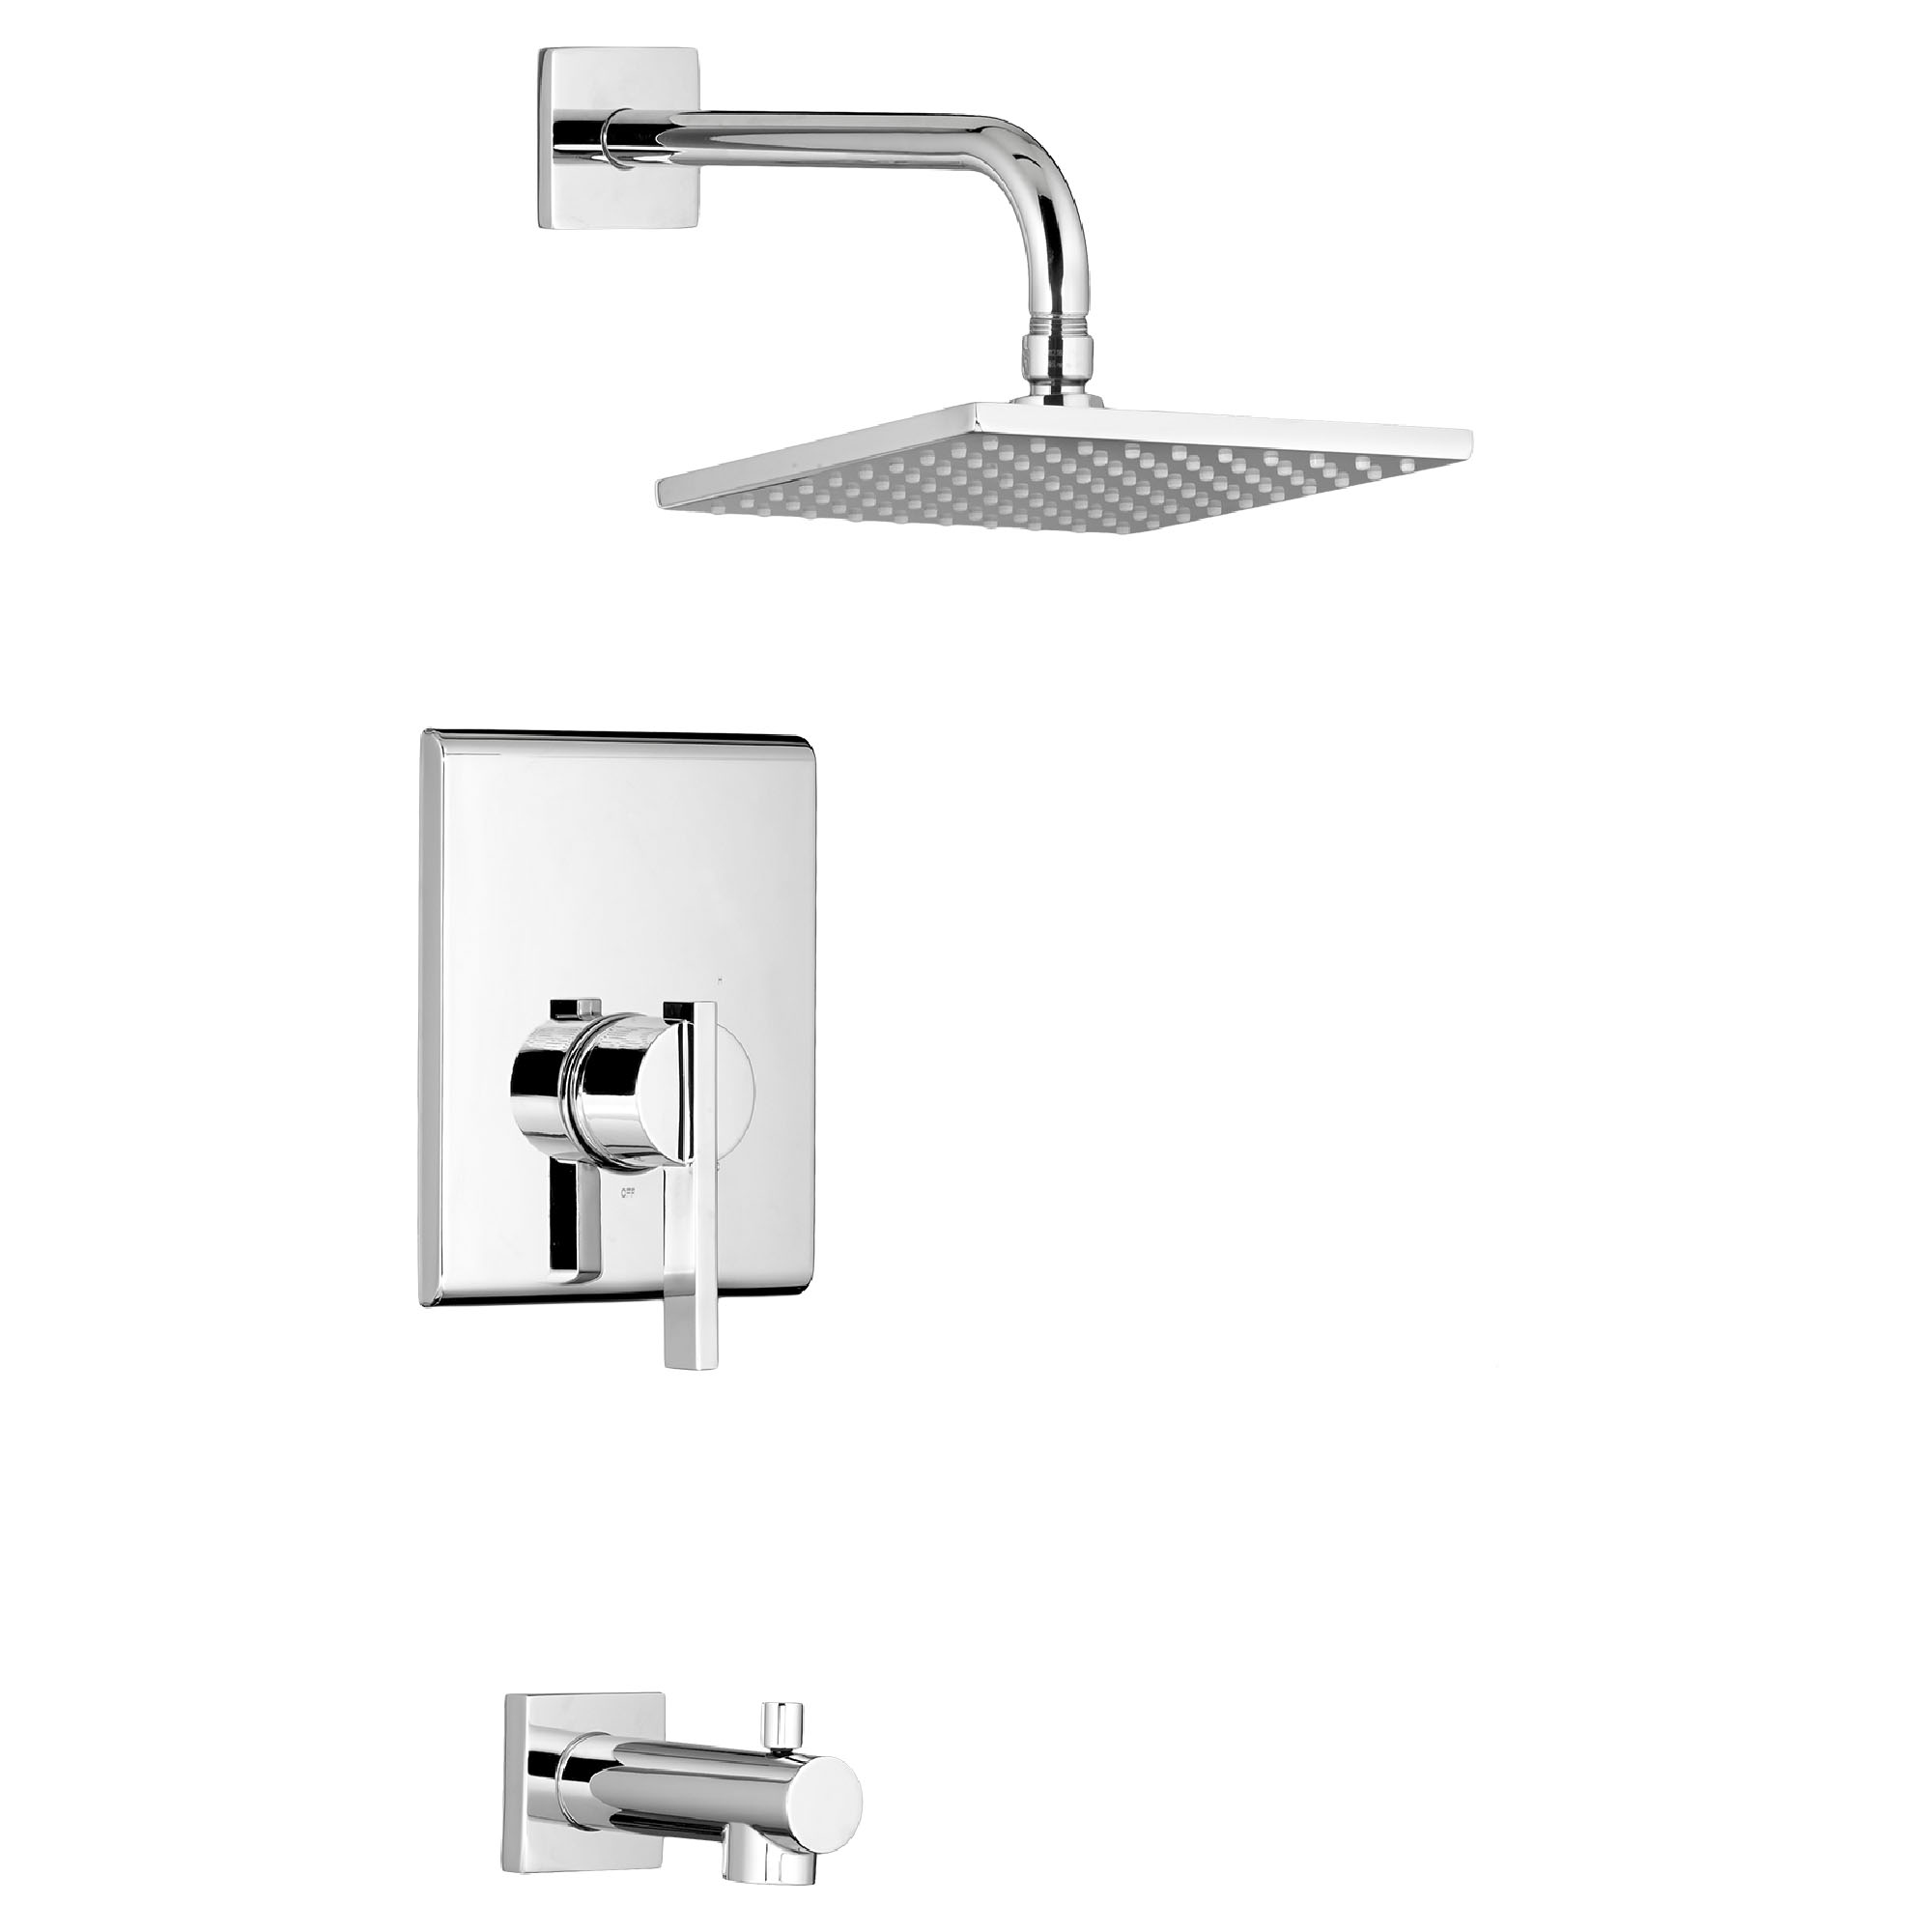 Times Square™ 2.5 gpm/9.5 L/min Tub and Shower Trim Kit With Rain Showerhead, Double Ceramic Pressure Balance Cartridge With Lever Handle